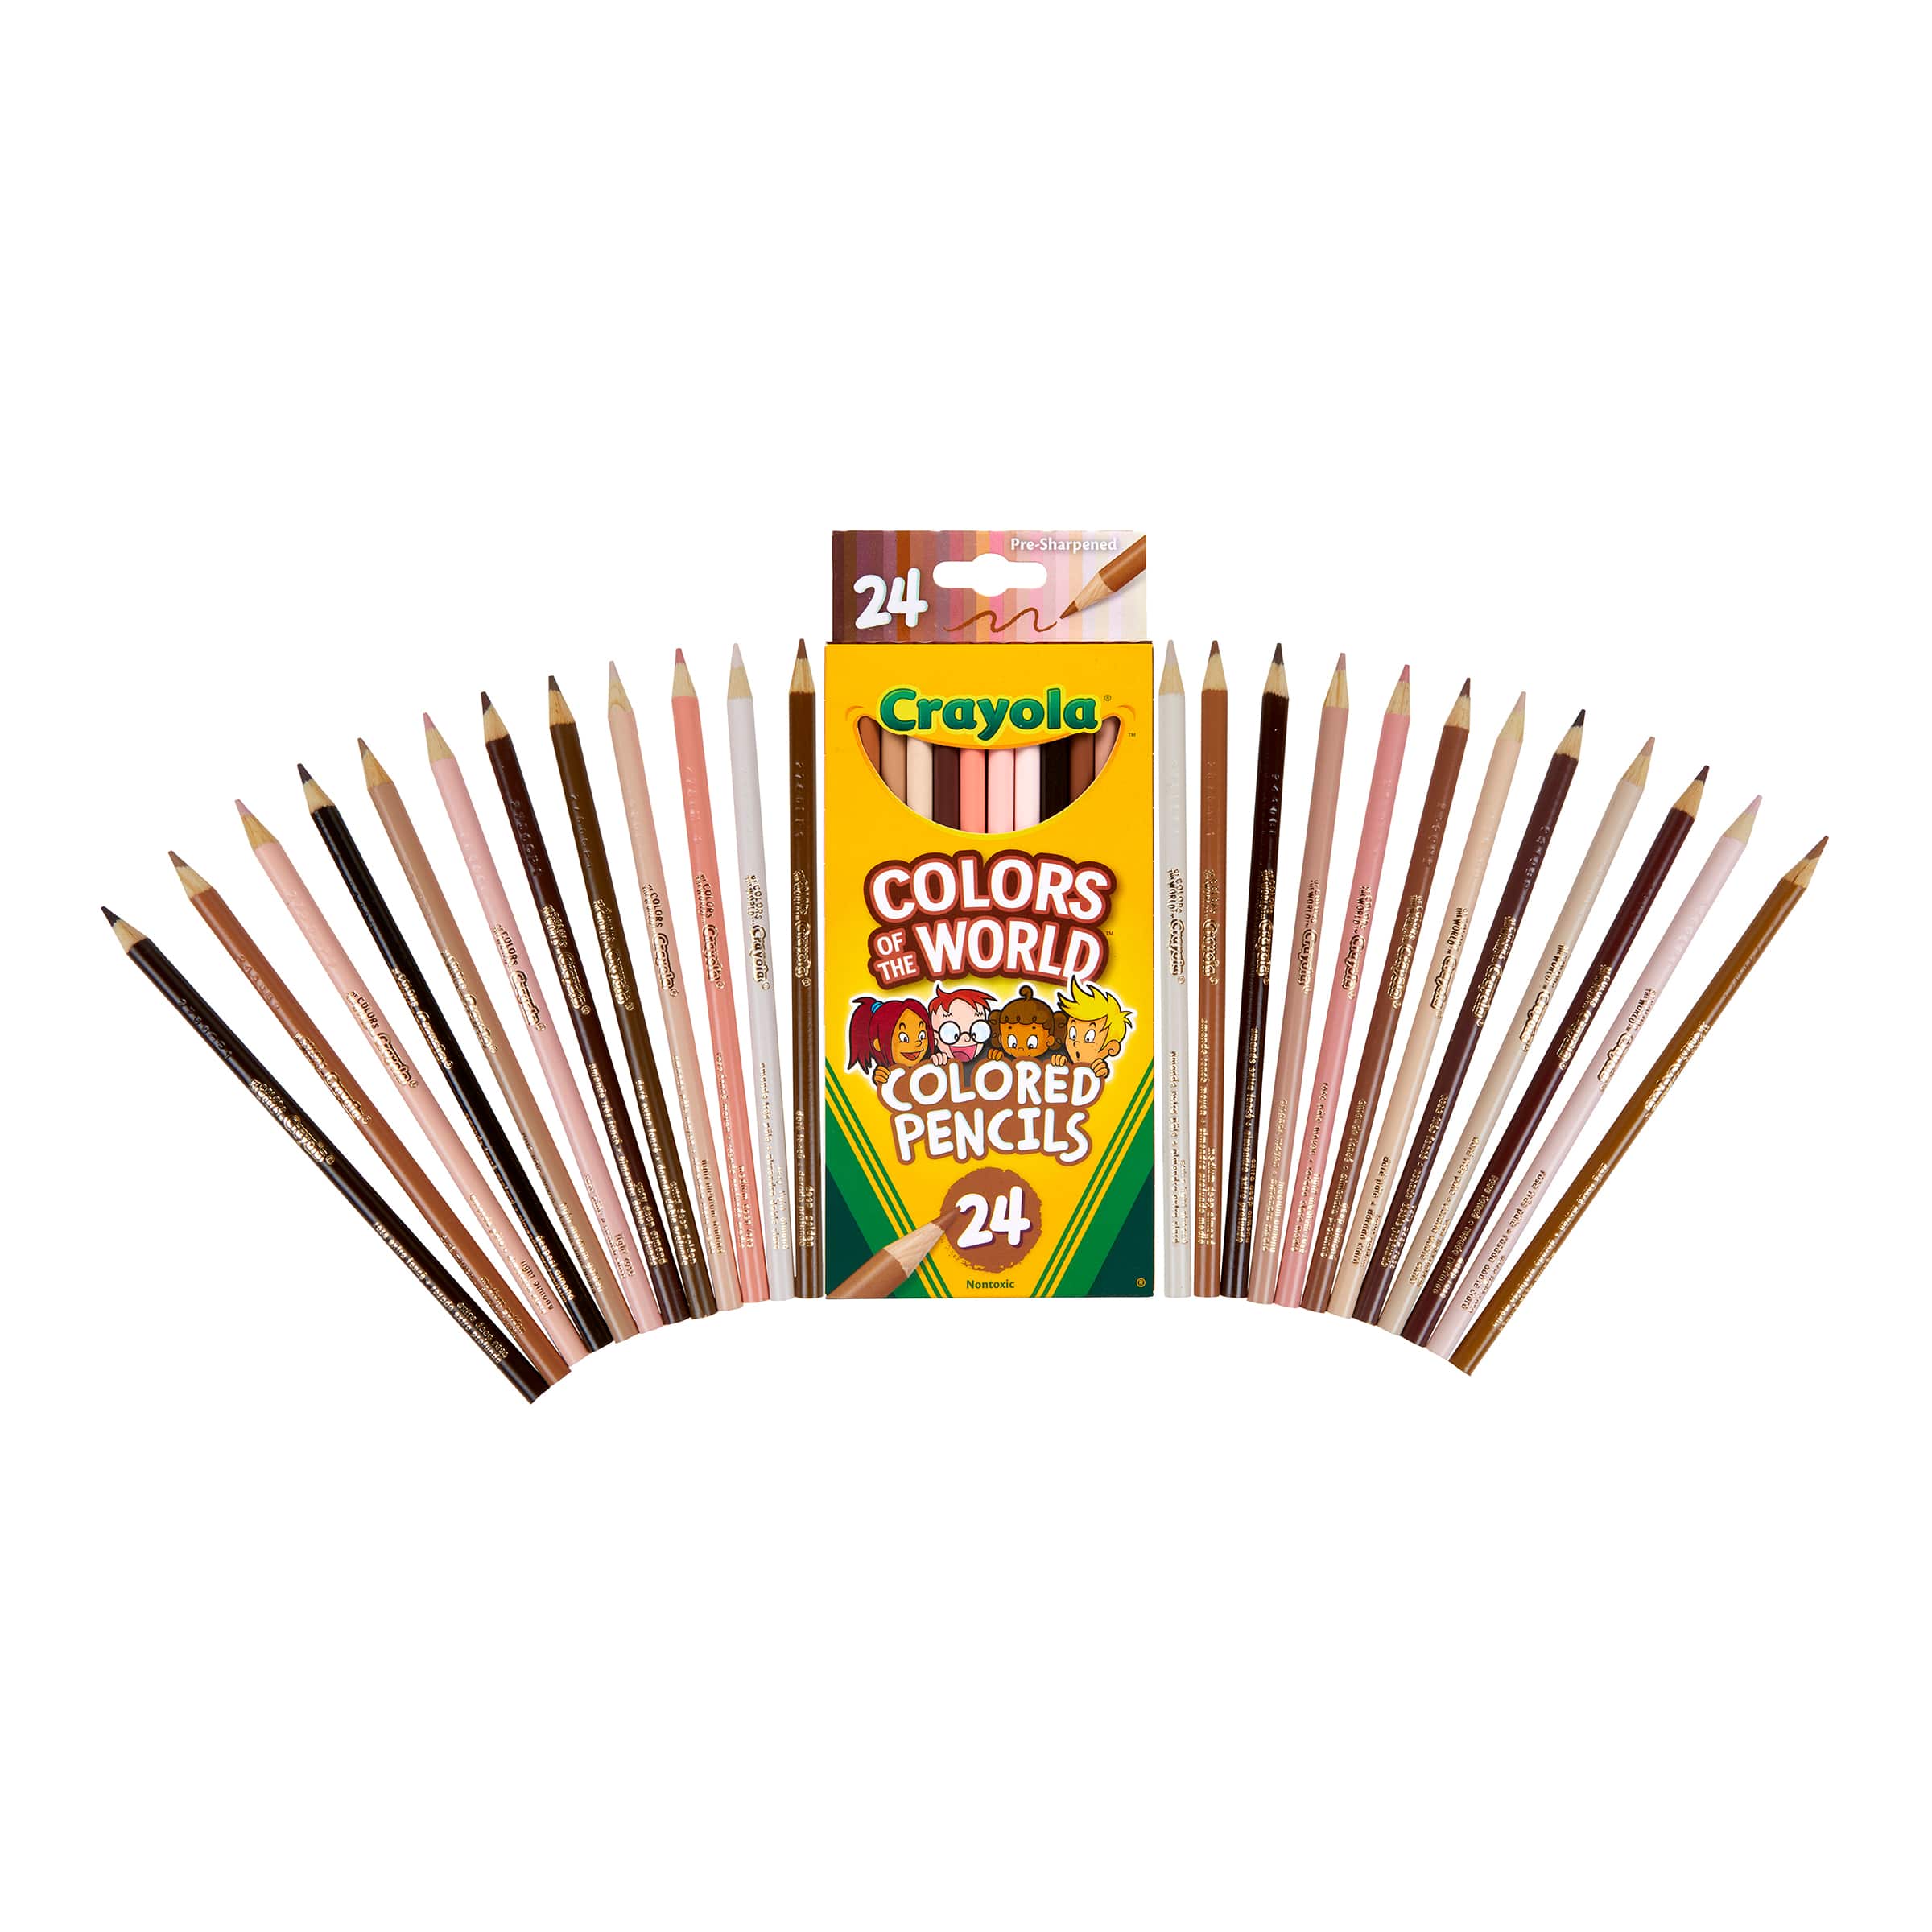 6 Packs: 24 ct. (144 total) Crayola&#xAE; Colors of the World Colored Pencils